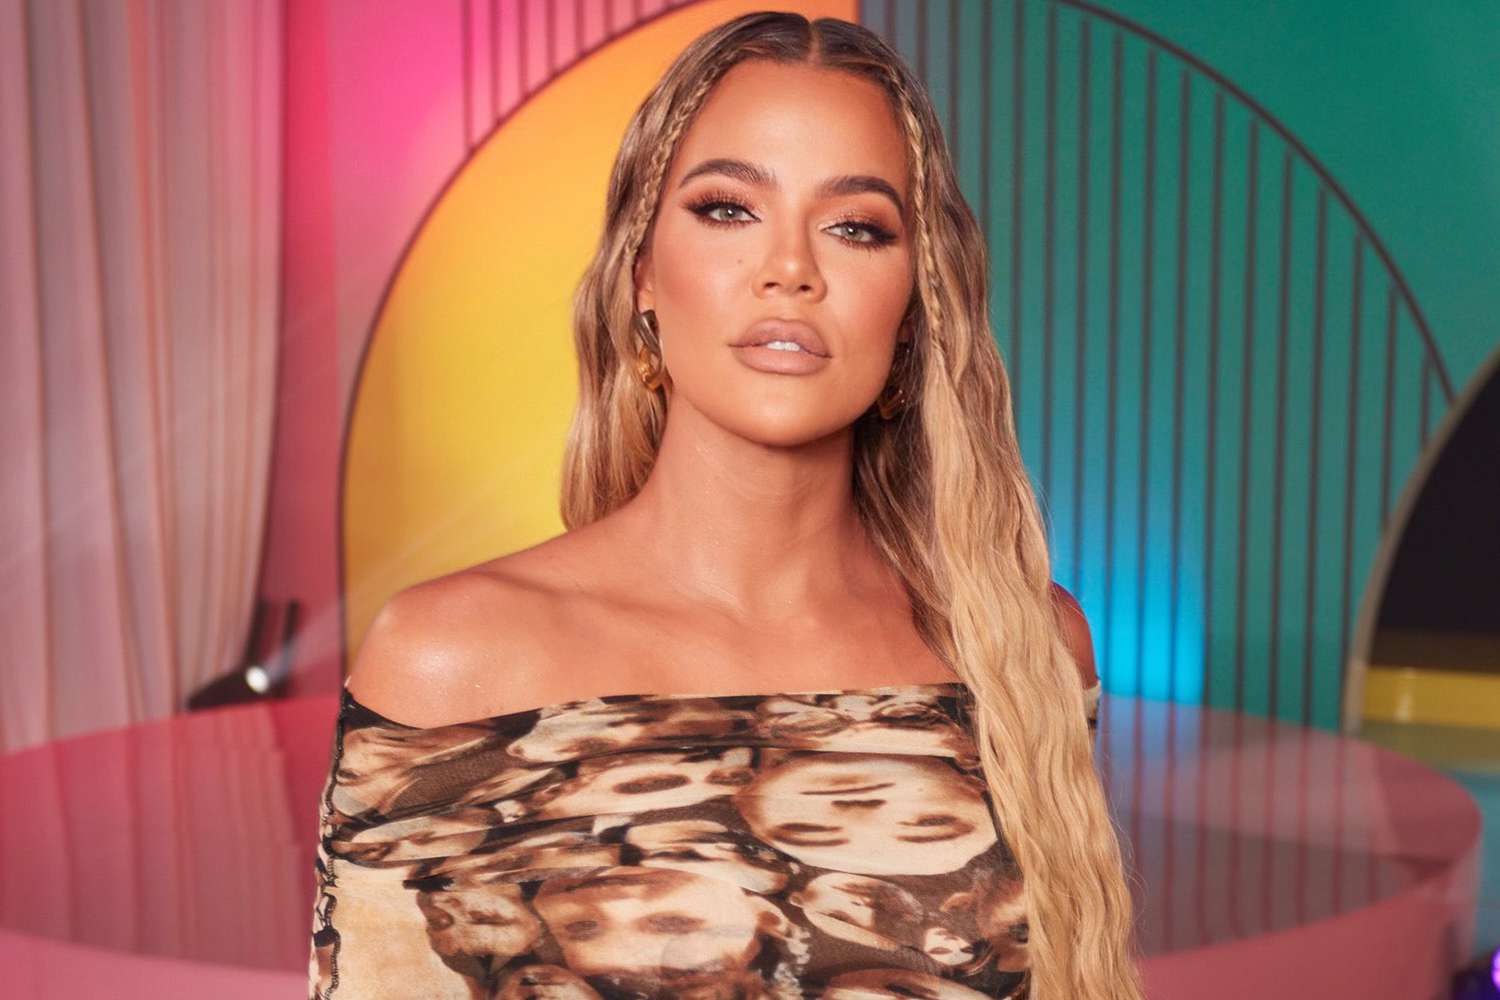 Khloe Kardashian Reacts to 'Unsolicited Commentary' About True | PEOPLE.com